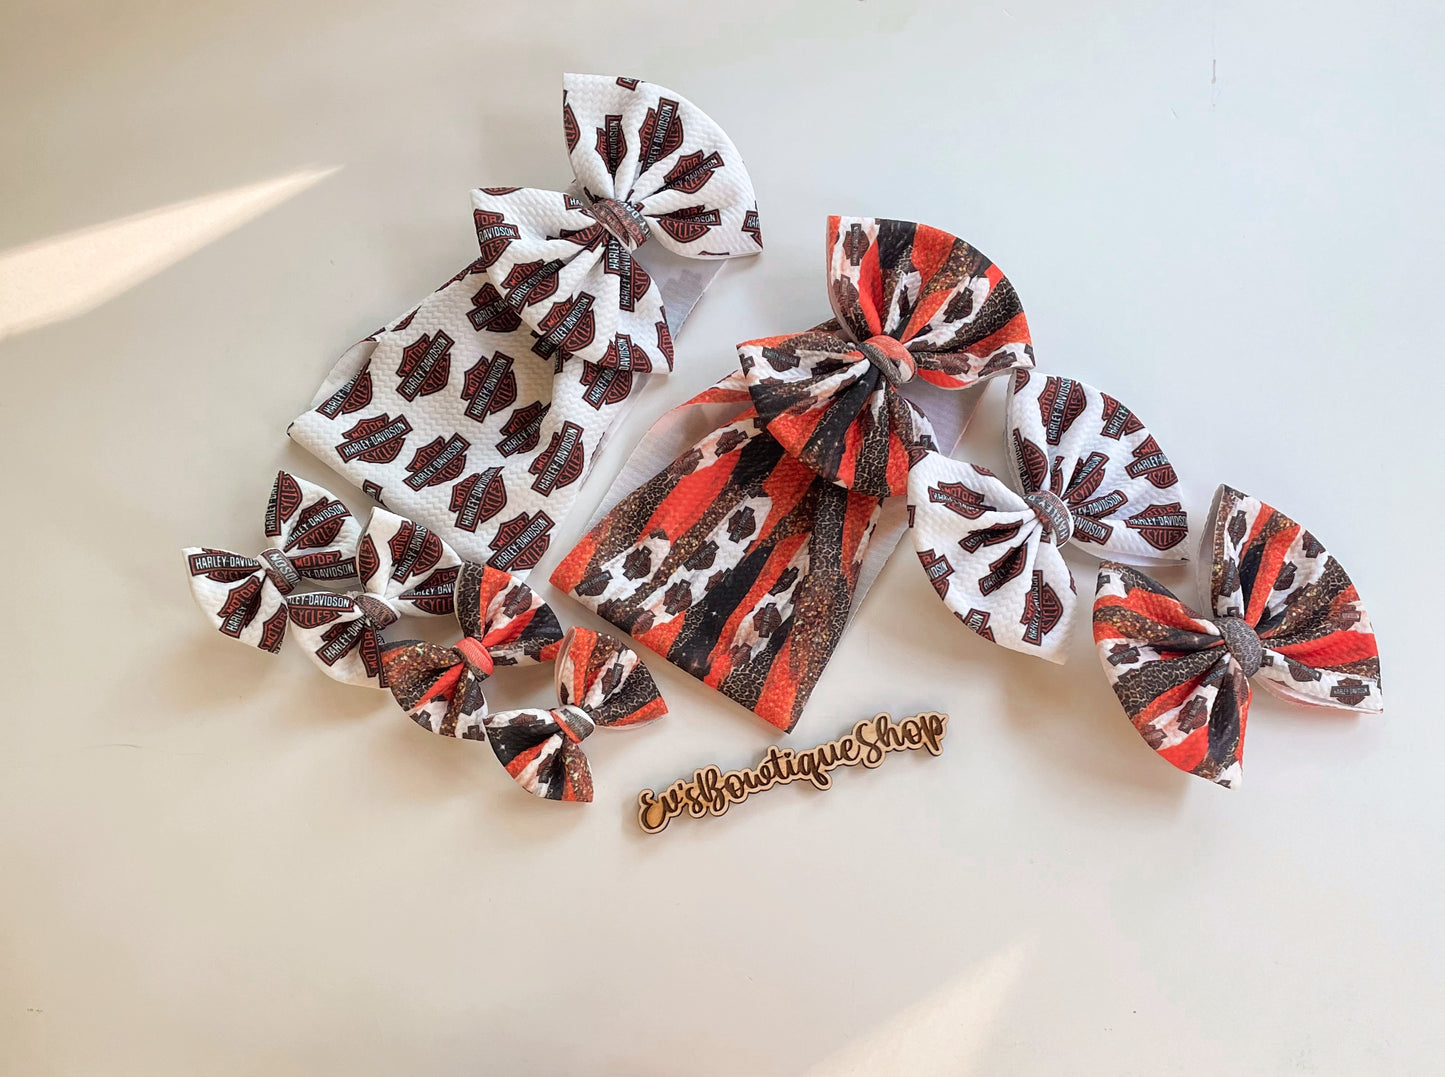 Harley - Ev's Bowtique Shop, The most comfortable trendy bows for all of your babes. Traditional bows come styled as headwraps, Nylons, clips or pigtail sets! The choice is always yours!